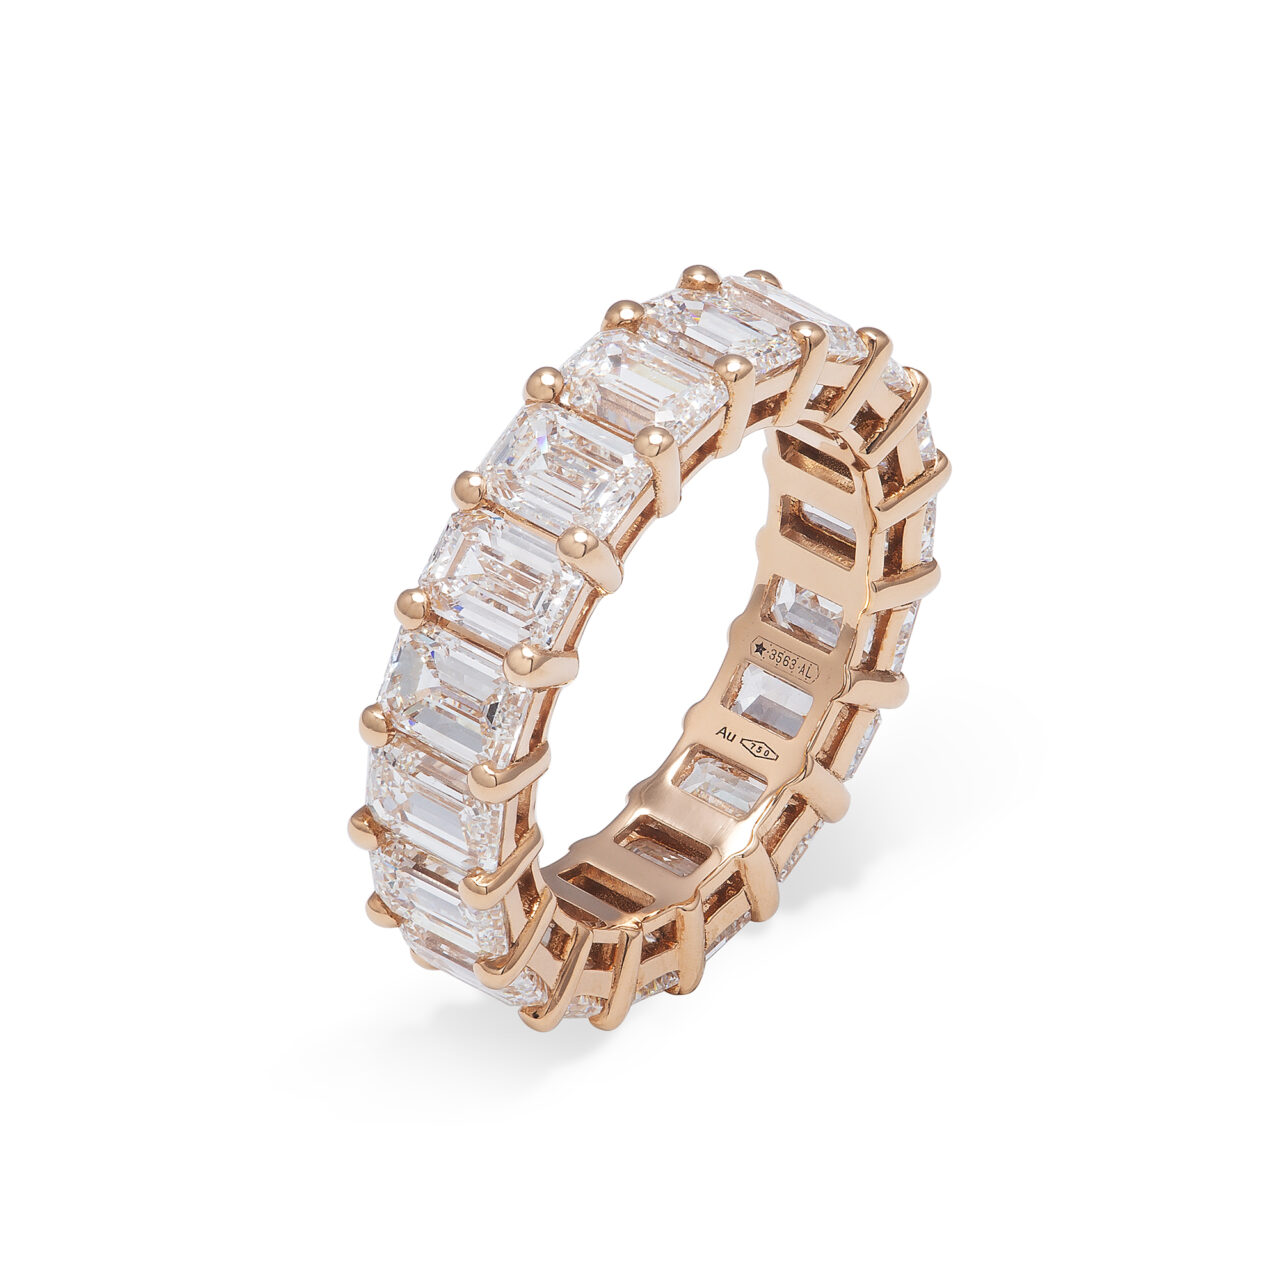 Eternity ring in pink gold and diamonds